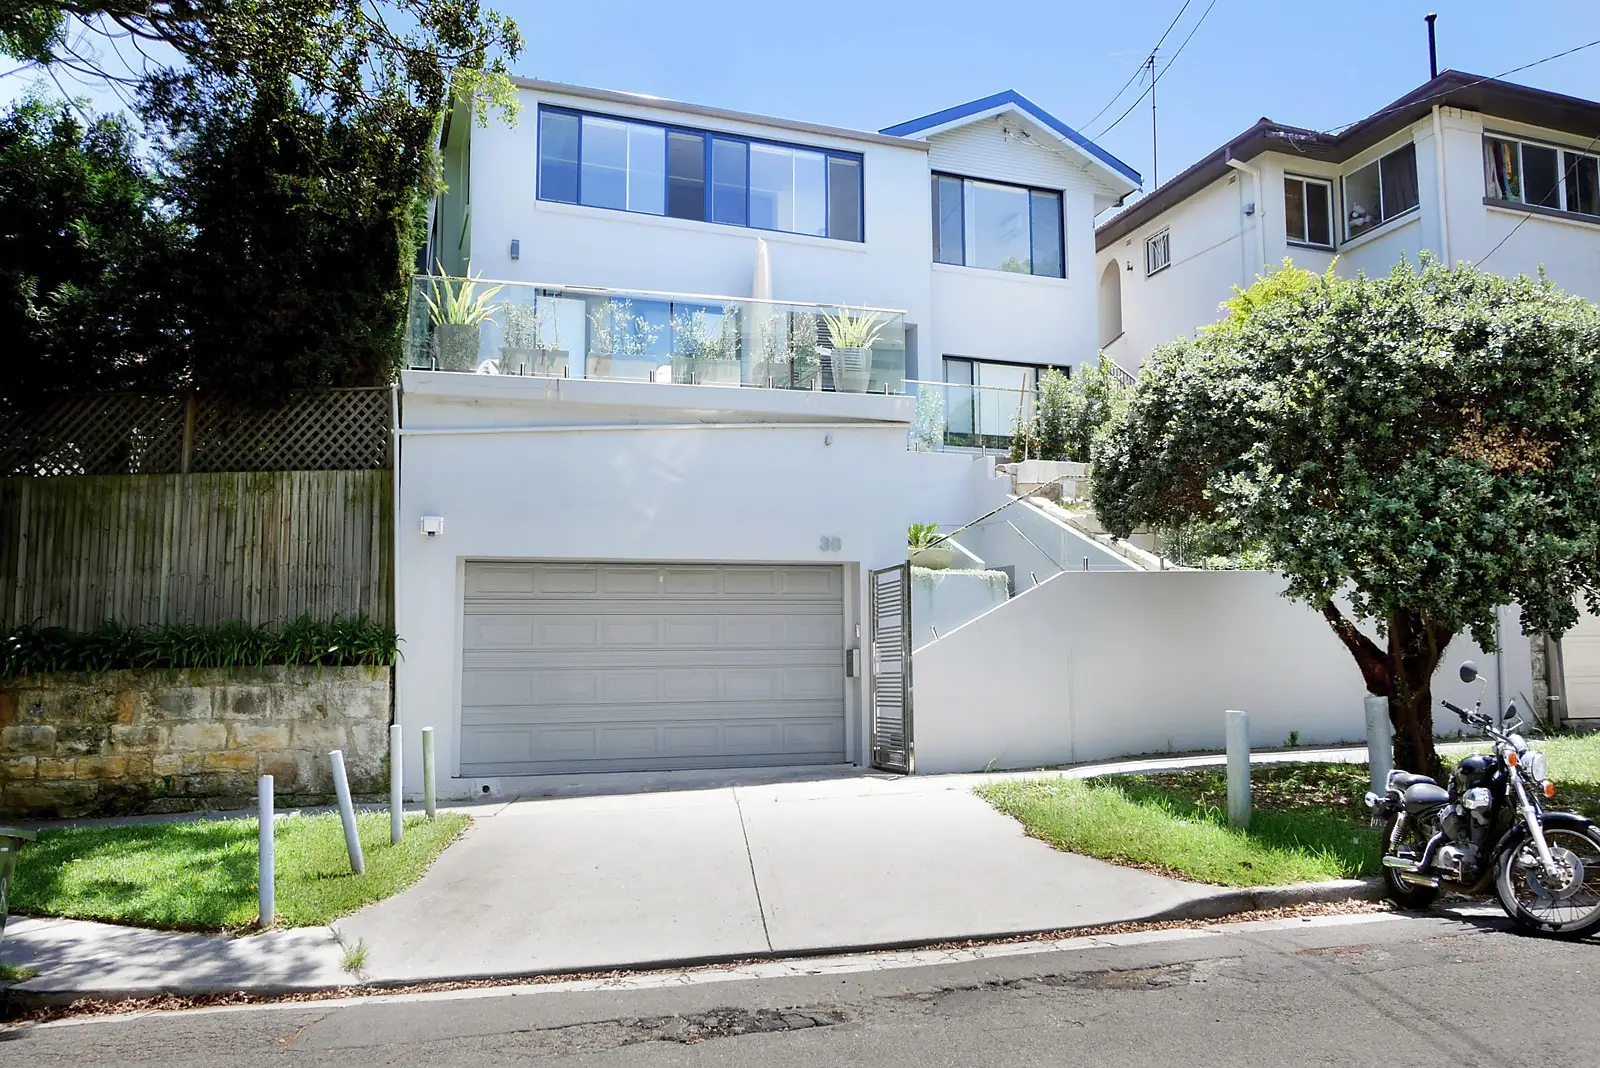 Photo #1: 38 Dudley Road, Rose Bay - Sold by Sydney Sotheby's International Realty